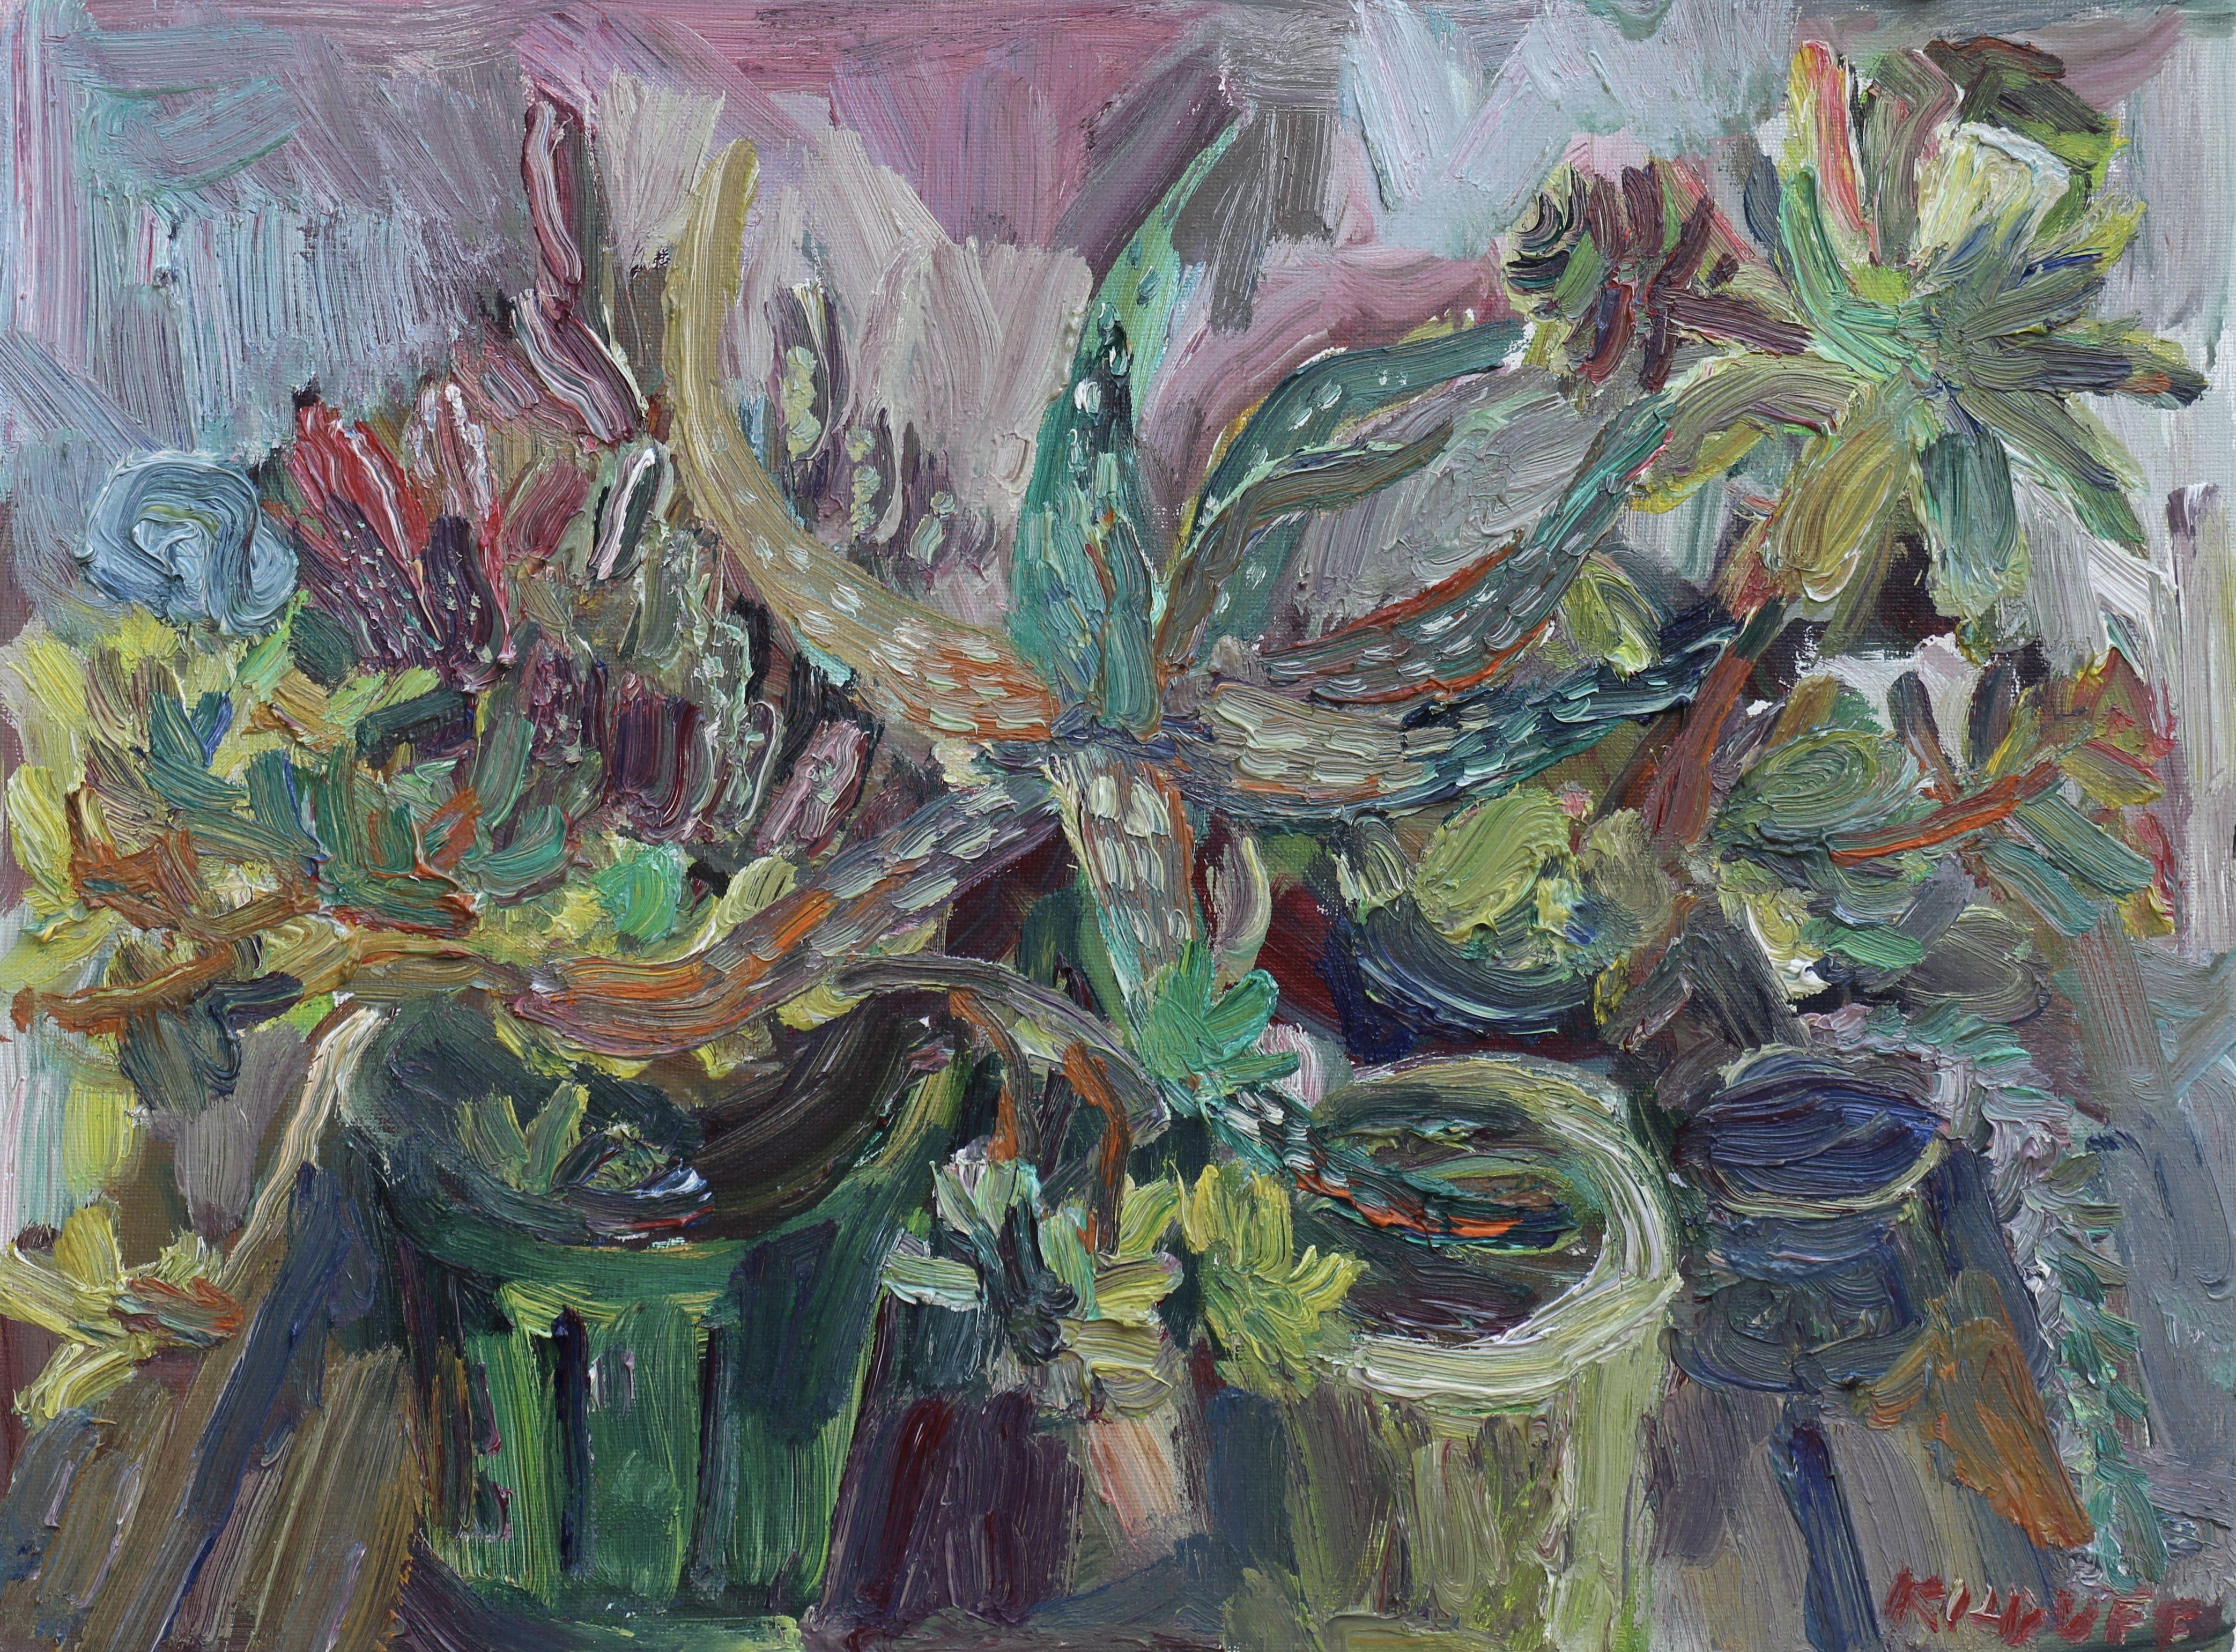 Plein air oil painting of the cactus plants in the backyard. I also painted on another painting at the same time (cactus plants oil #1) which is also listed separately. I made a video of the process, which can be viewed on Youtube: /Dd78ghZ-wVs  The